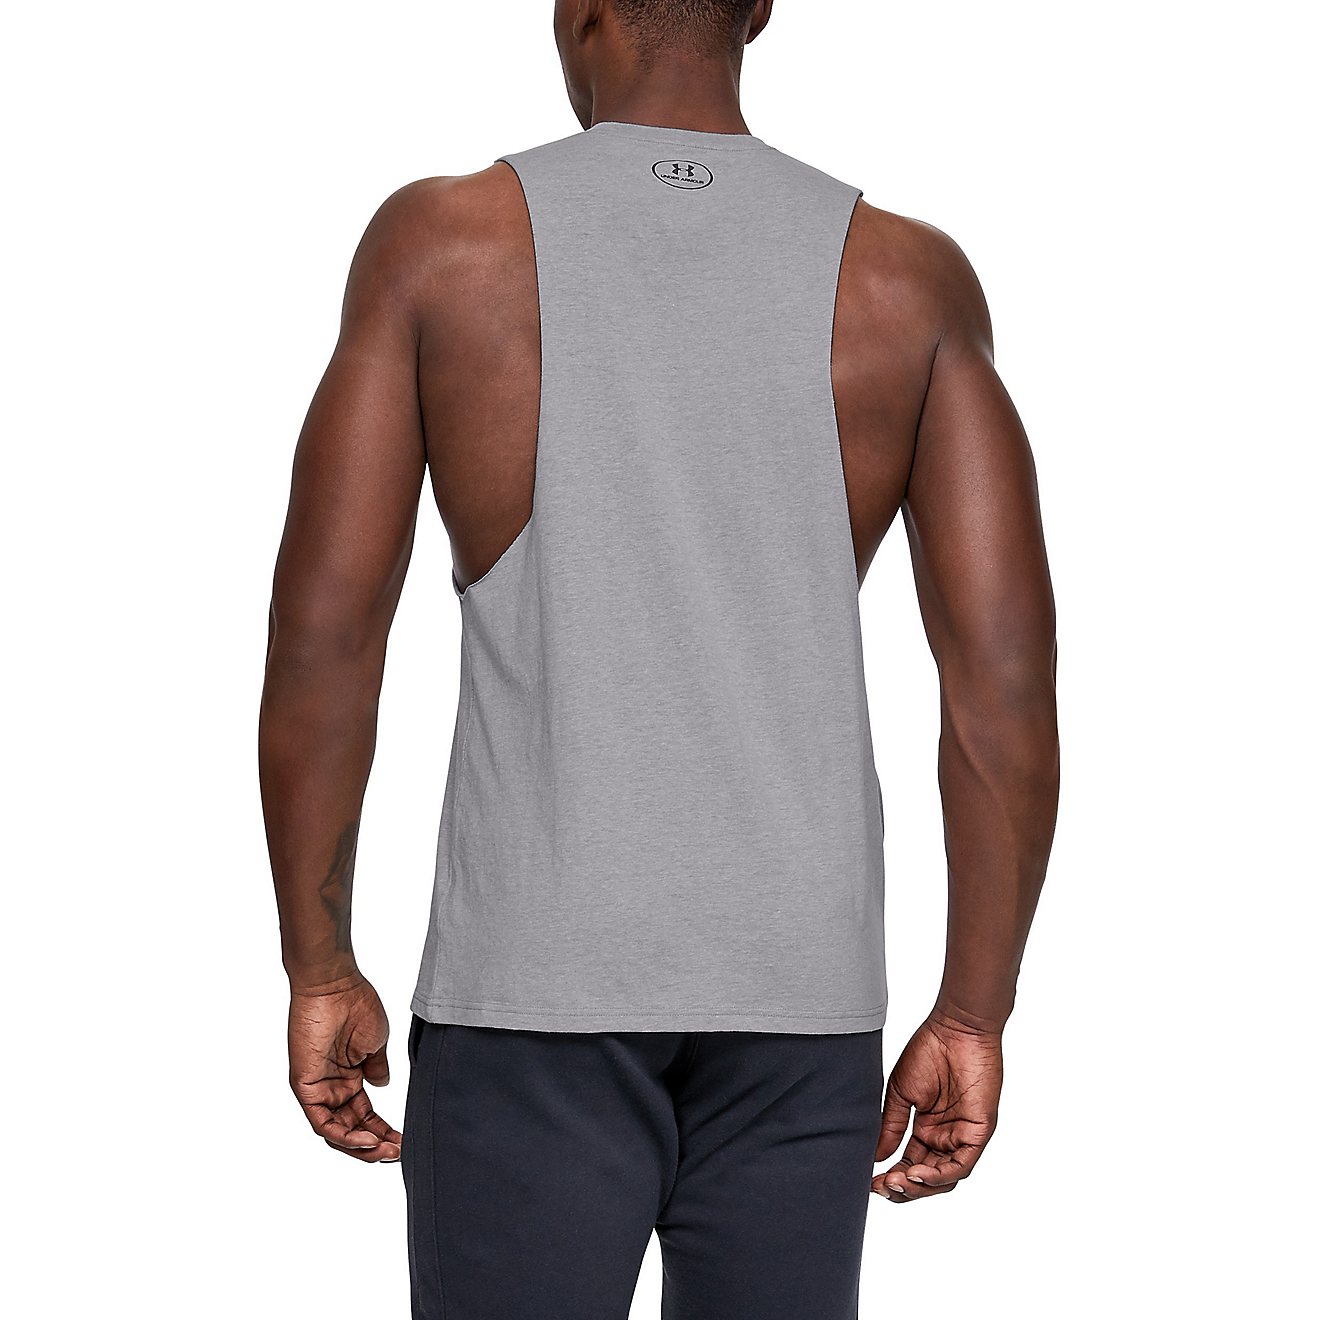 Under Armour Men's Sportstyle Left Chest Cut-off Sleeveless Top                                                                  - view number 2